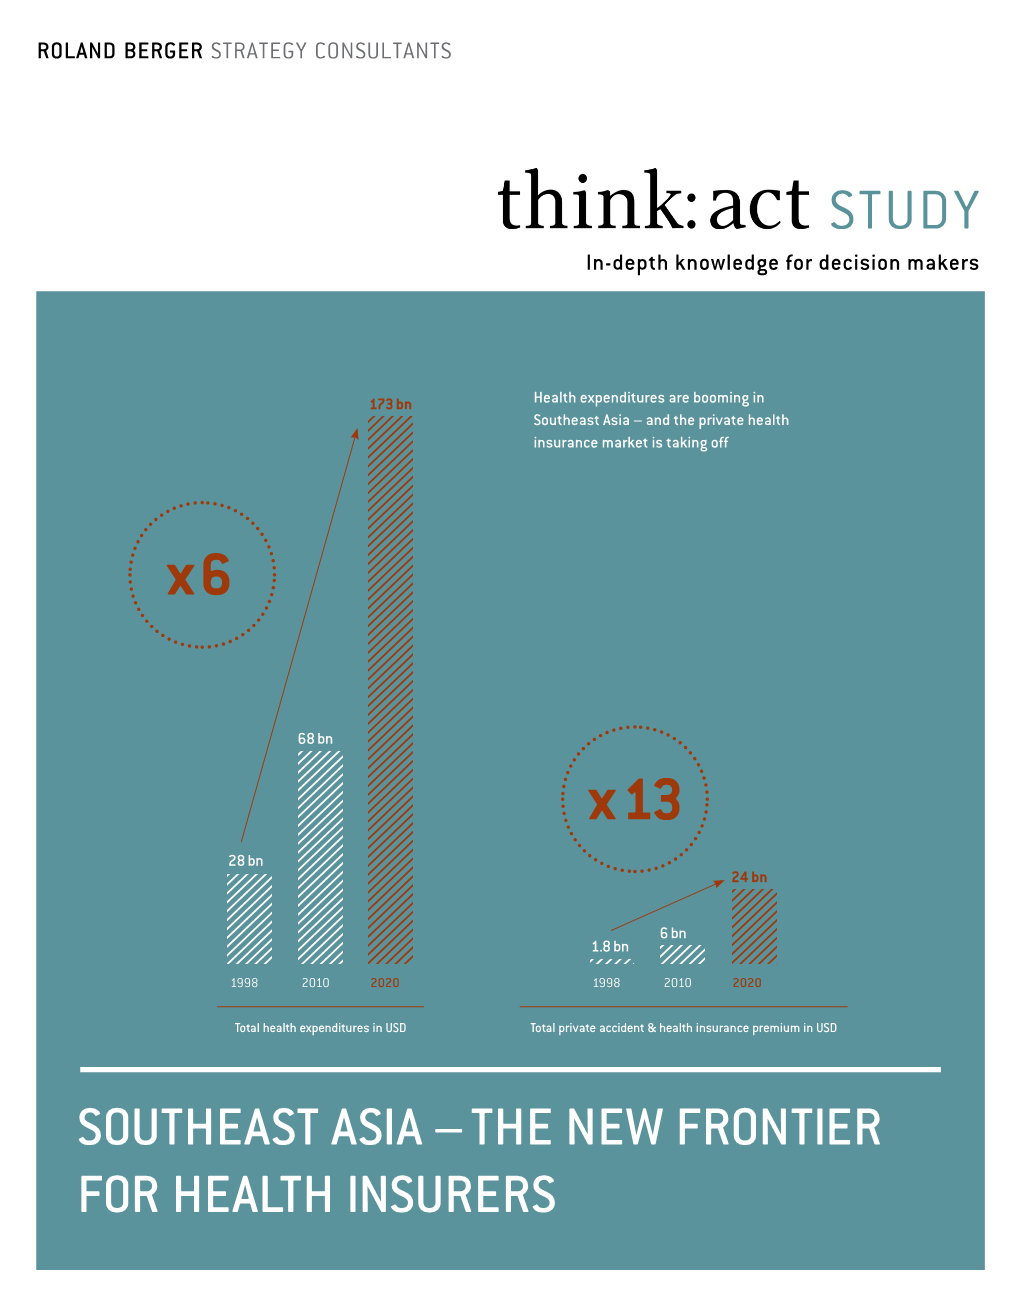 Private Health Insurance in Southeast Asia Will Increase, Accounting for 6% of Health Expenditures by 2020 X 4.4 (Compared to 4% in 2010)